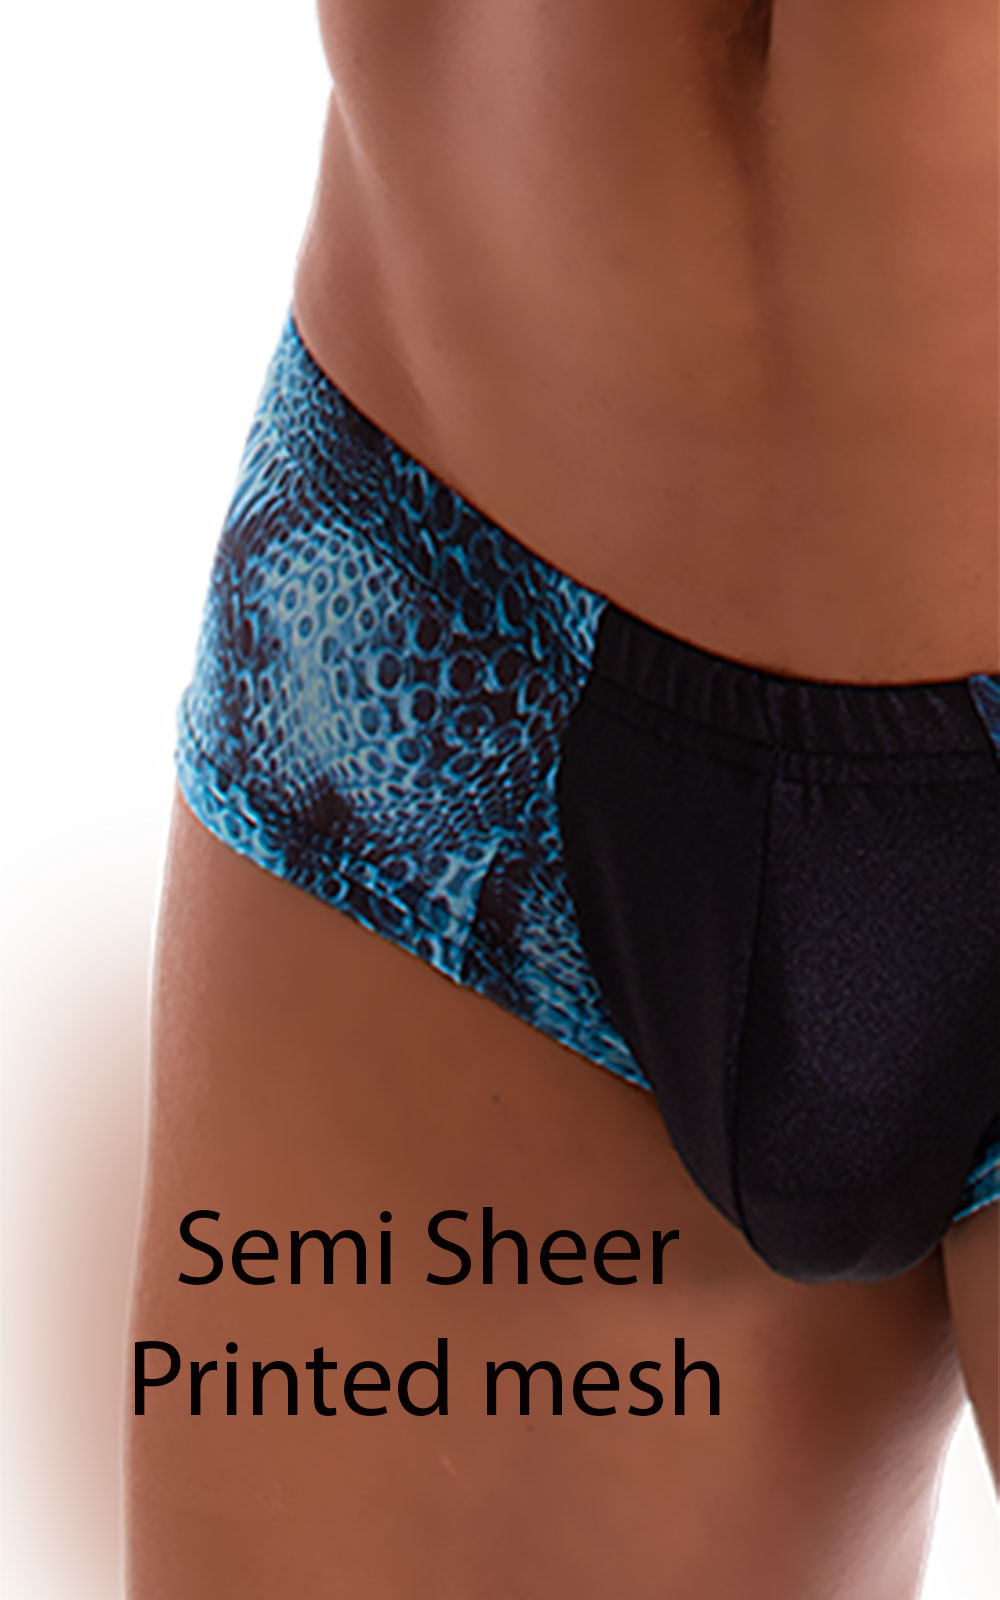 Pouch Enhanced Micro Square Cut Swim Trunks in Black and Eroc Printed Mesh 7